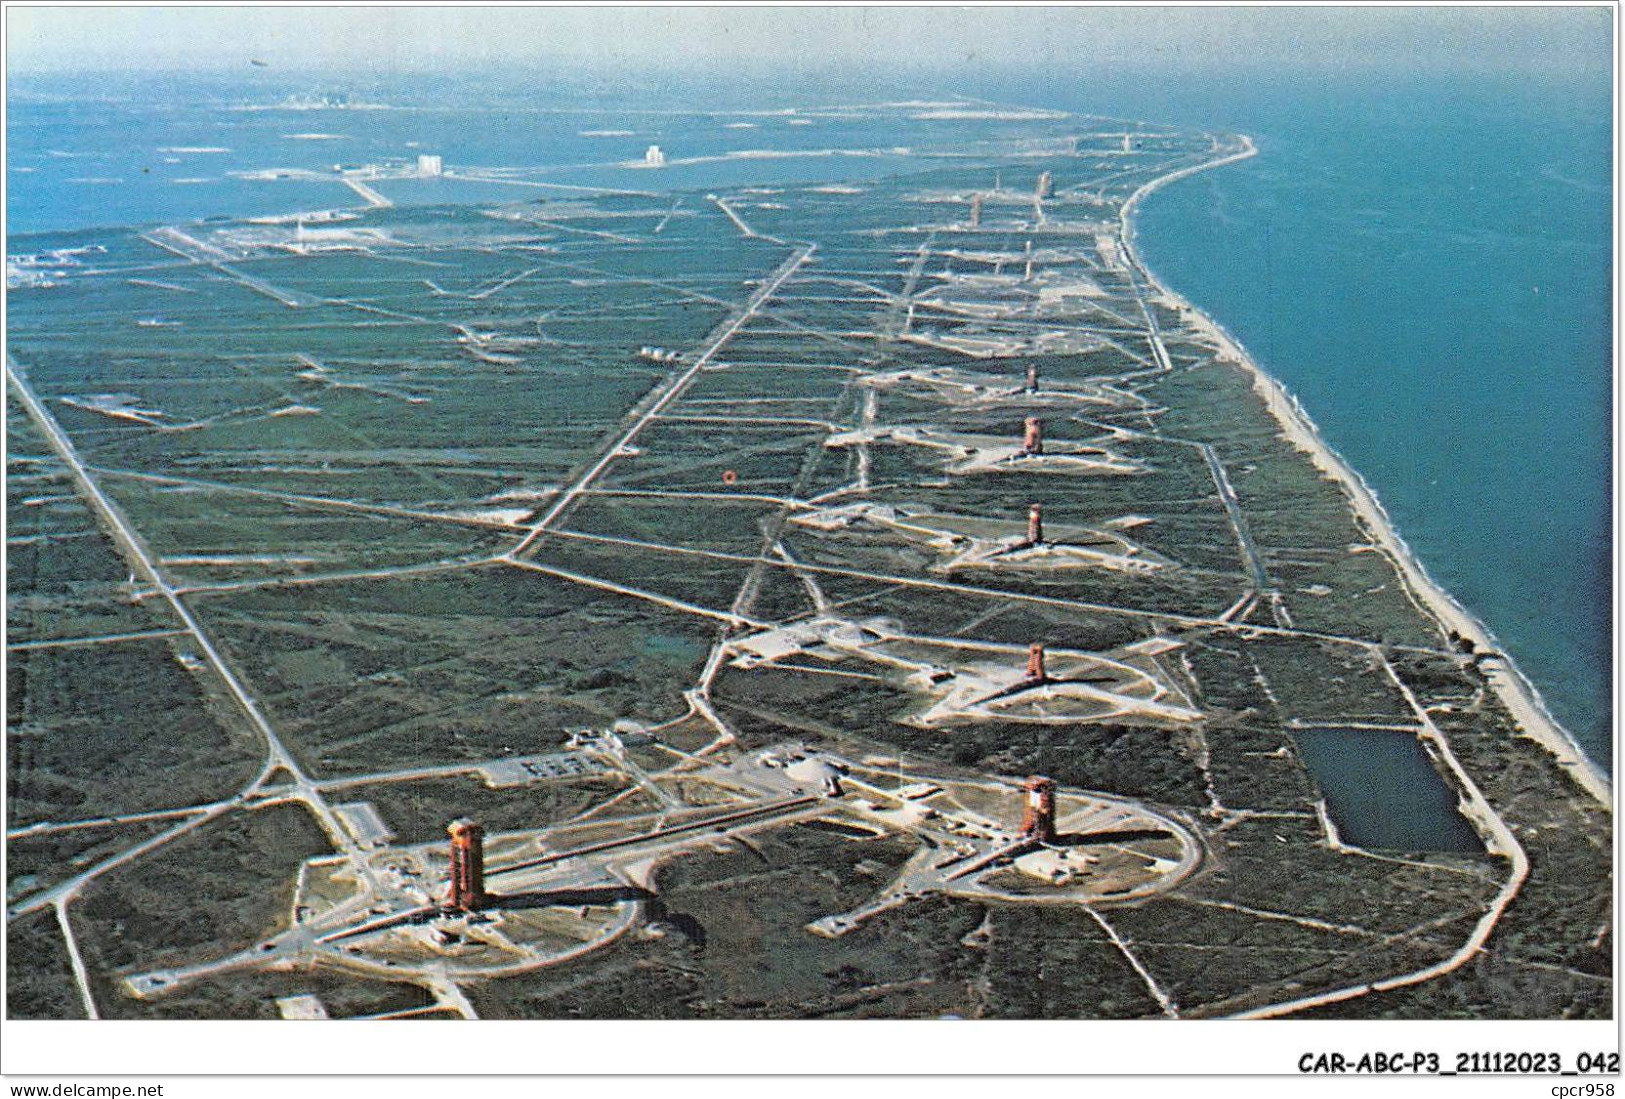 CAR-ABCP3-0205 - AVIATION - JOHN F-KENNEDY SPACE CENTER - N-A-S-A - OVERALL AERIAL VIEW OF MISSILE ROW LOOKING NORTH - Flieger